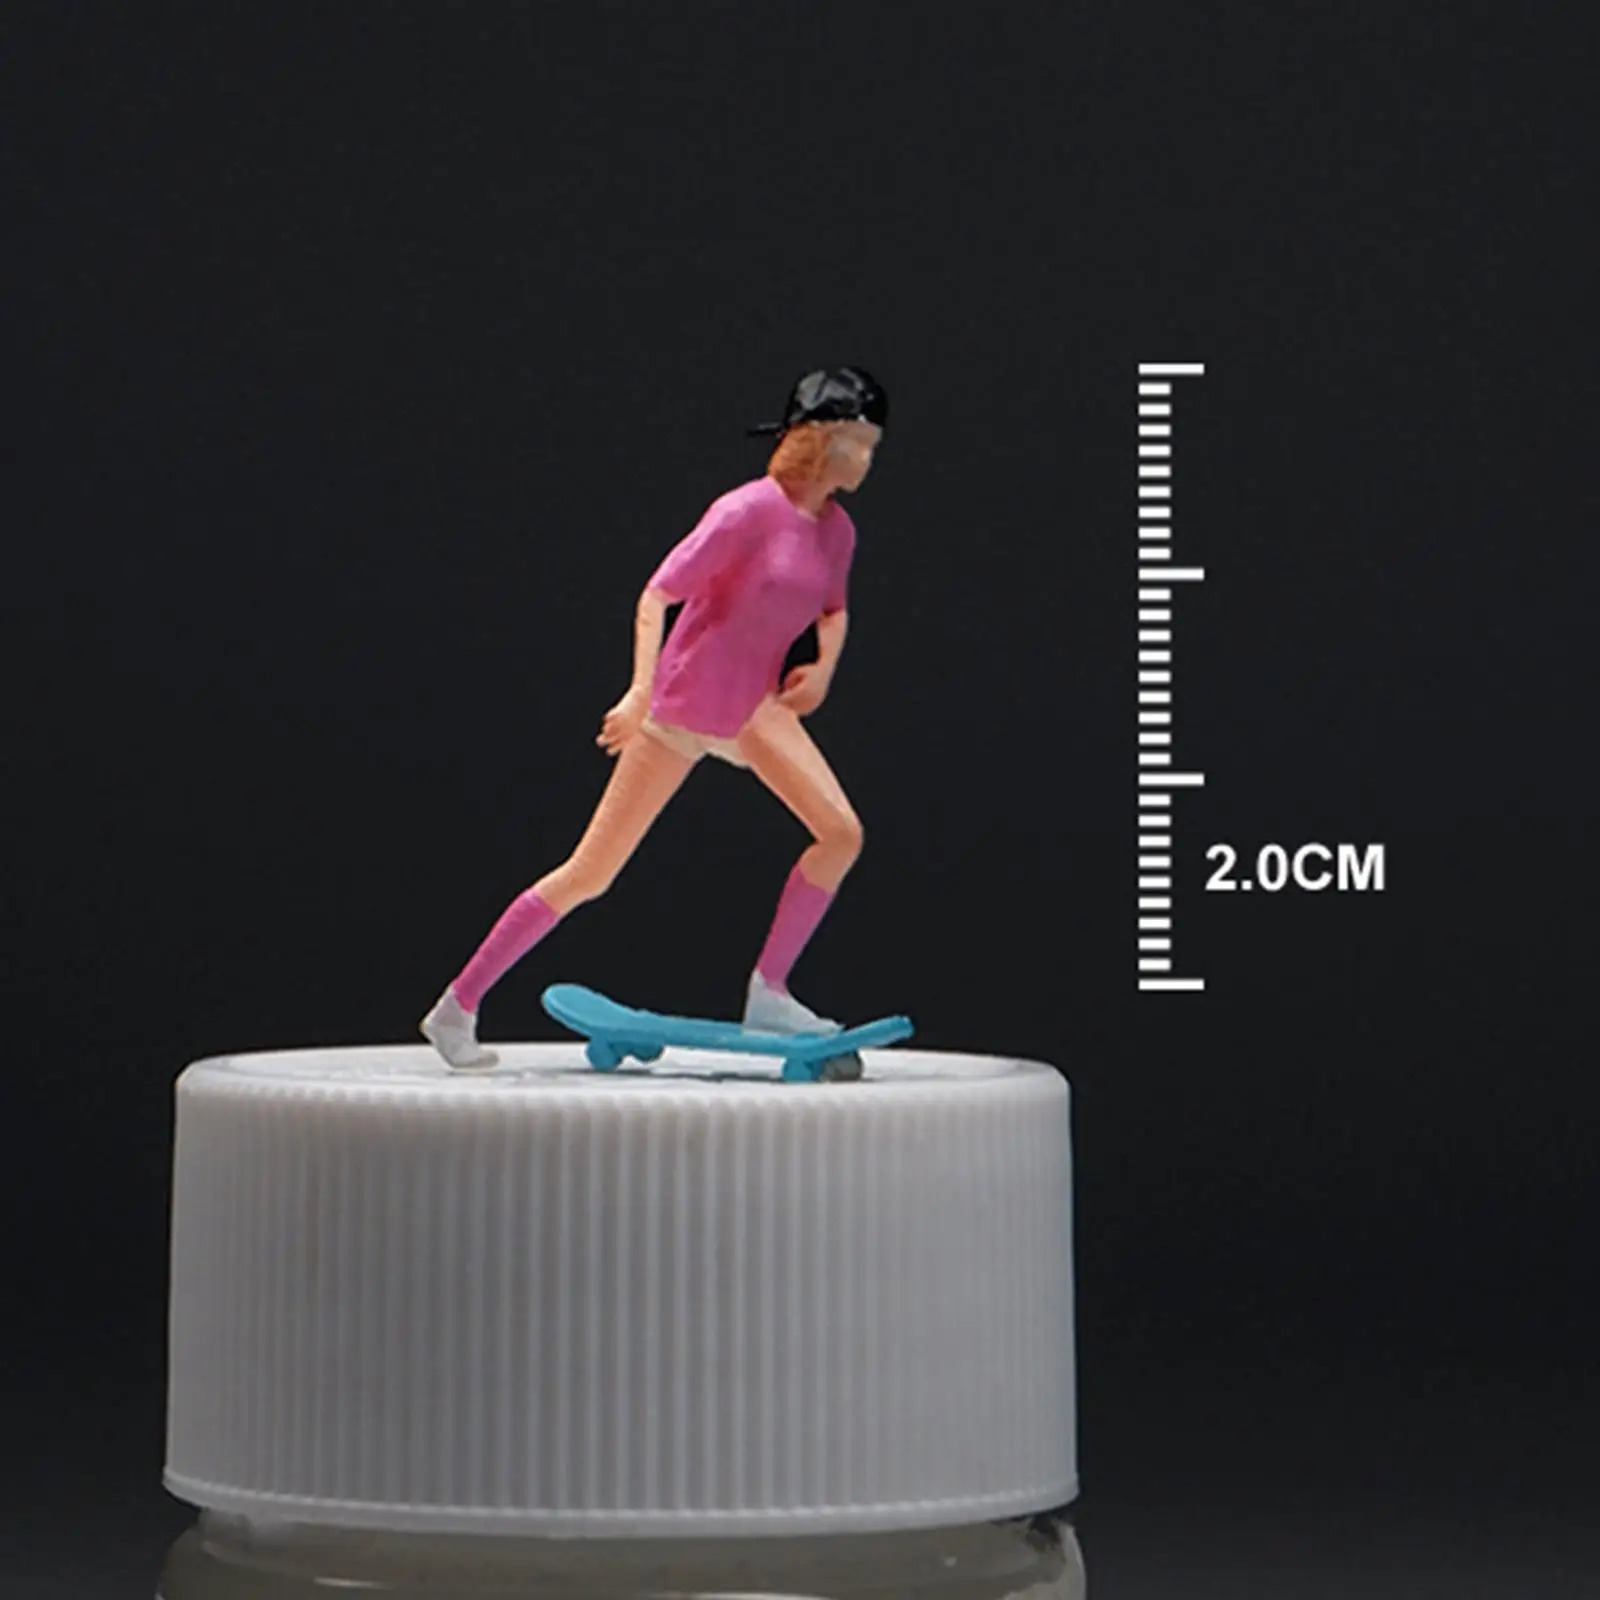 Resin 1/64 Diorama Figures Model Skateboard Girl Miniature Tiny People for Dioramas Sand Table DIY Projects Layout Ornament